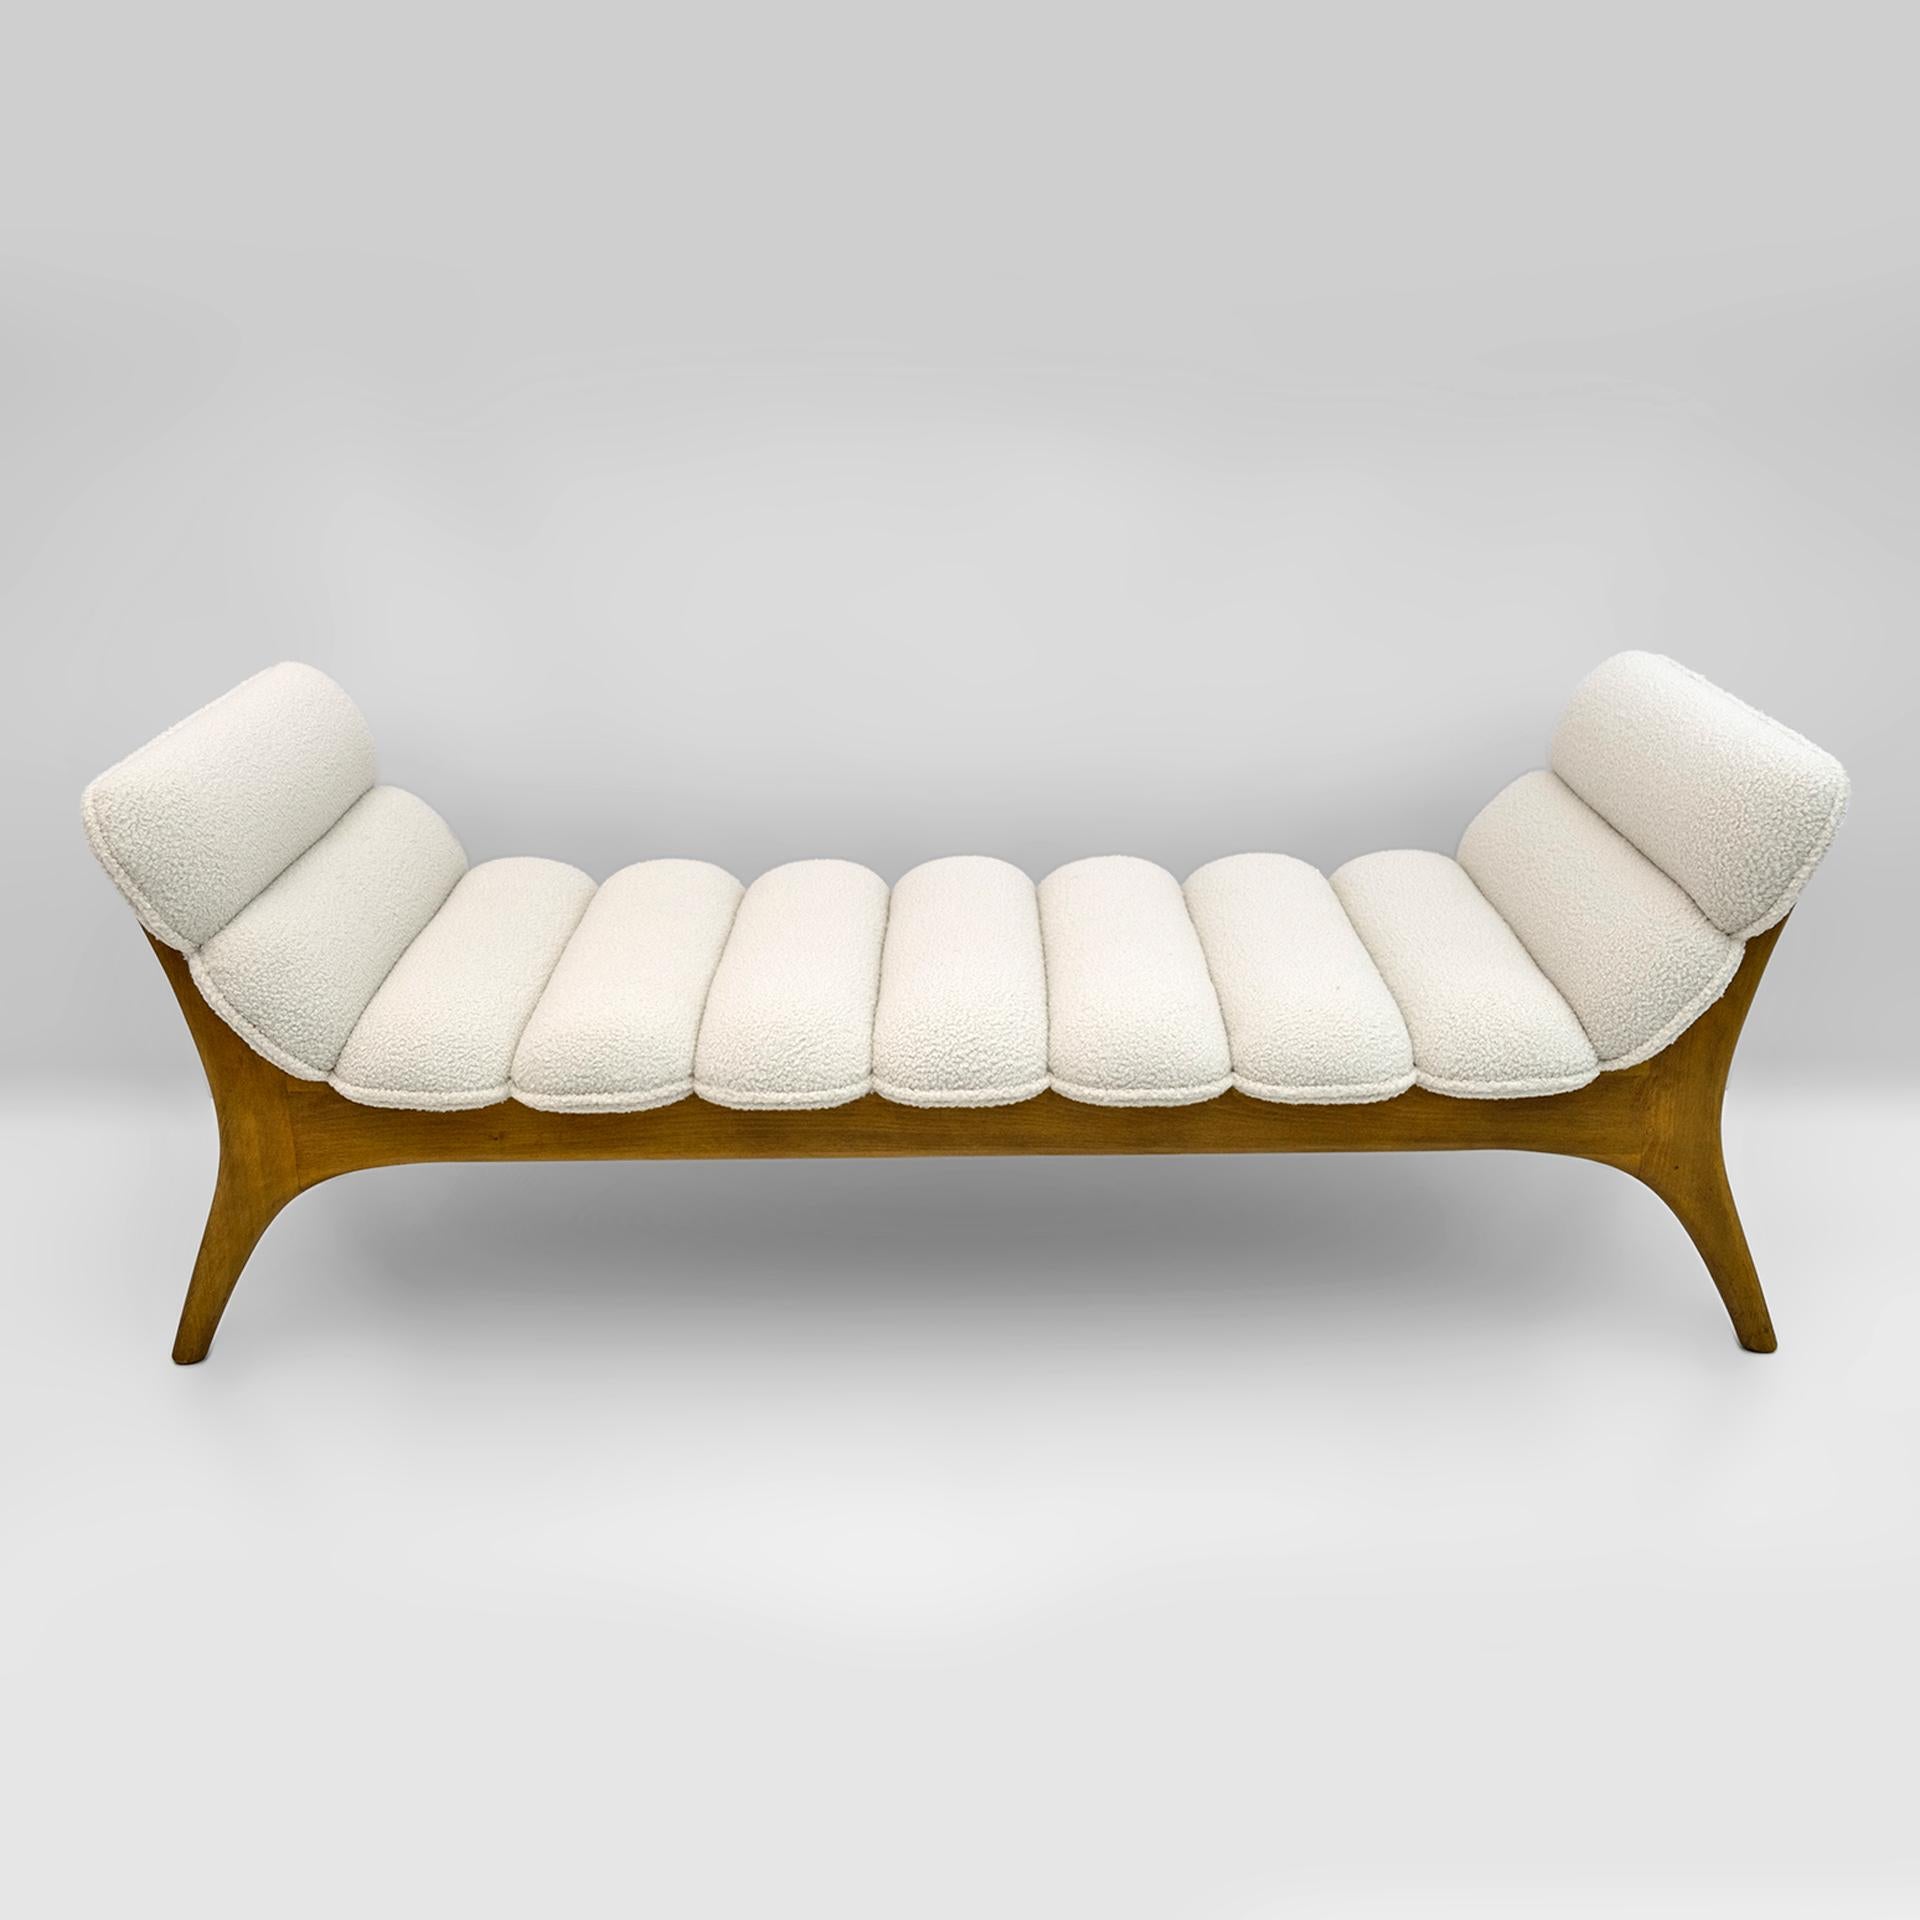 Mid-20th Century Adrian Pearsall Mid-Century Modern Walnut Chaise Lounge by Craft Associates For Sale